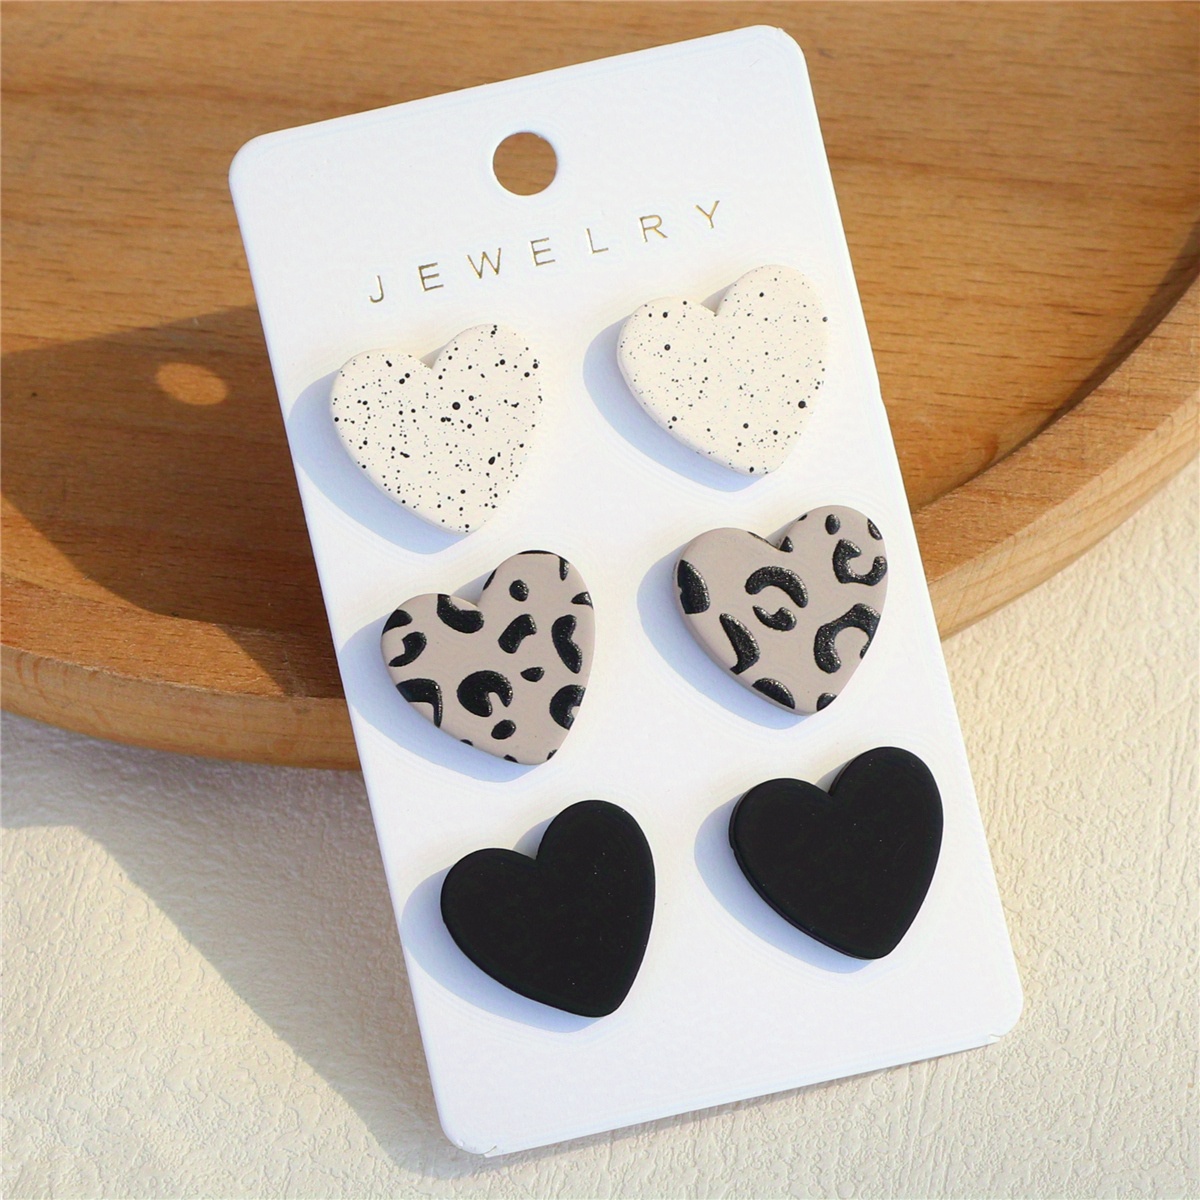 3 pairs set heart shape design cute stud earrings acrylic jewelry exquisite gift for women girls daily casual 190 8